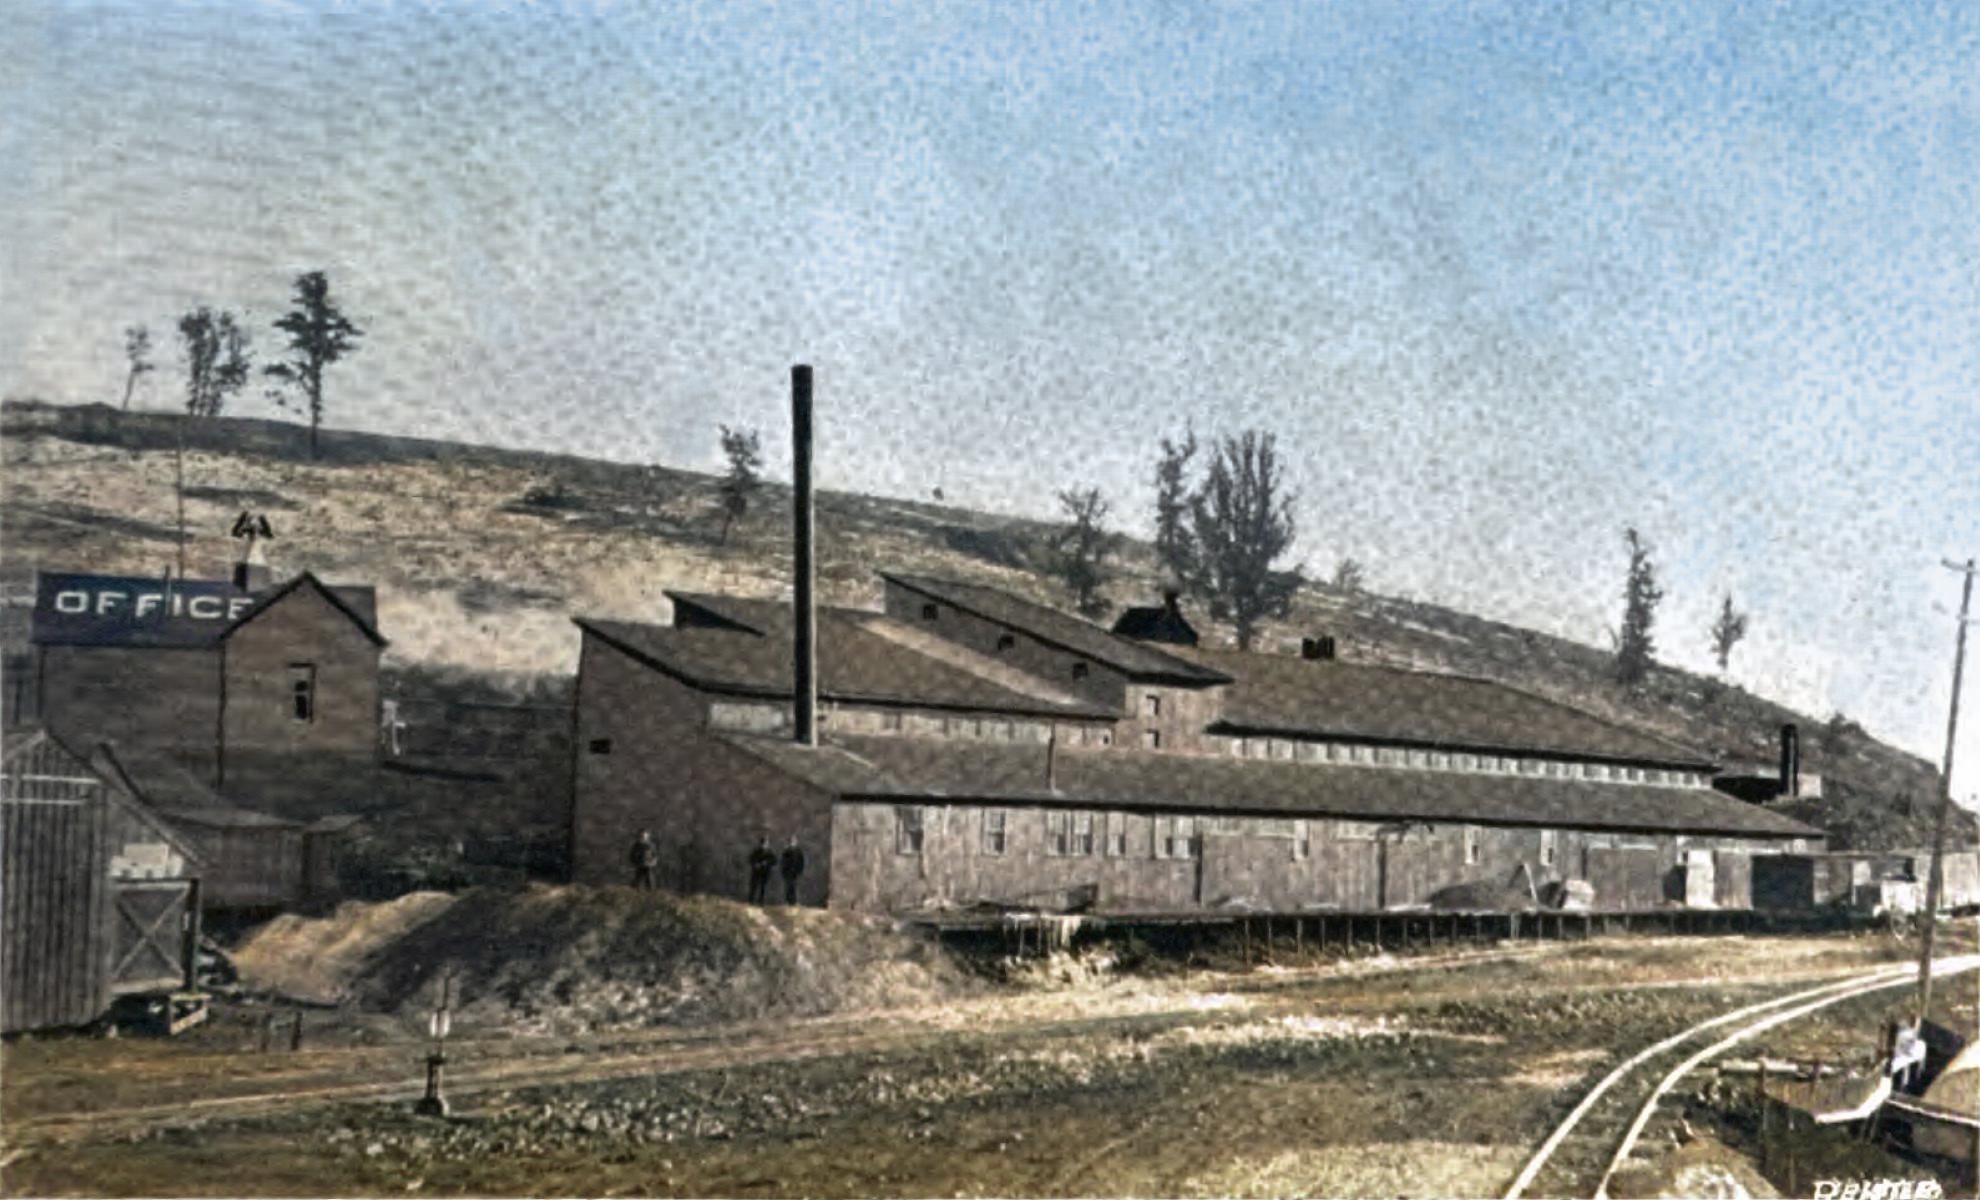 This sadly bad view of the Rio Grande Sampler, former Cripple Creek Sampler, is the best one of the very few known views of this sampler which was located at south end of the town of Cripple Creek. Located just below the mainline of the Florence & Cripple Creek railroad, at the approach to its yard, which would be outside the view at left, behind the structure marked as Office.
   This used to be the sampler of the Cripple Creek Sampling and Ore Company, but they built a new sampler further up Gold Hill, along the Midland Terminal, and later at Victor Pass on Bull Hill and this sampler here was sold to the Rio Grande Sampling Company.
   The view appears in a 1898 publication, so it is too early for the showing of the Short Line loop which will later be on the hill in the background, but I have seen this structure on images with the loop so I know the structure lasted at least into the 1900's, but how long and how successful this sampler was, I do not know as when the few text pieces I find about a Rio Grande Sampler don't say the location it might as well be talking about the one down in Victor.
   I did procure the colored version of this image as I think it is nicer. Source is gray-toned, or in common speech black & white. Used an online service and tweaked and worked with image to get what looks best to my eyes for the moment.